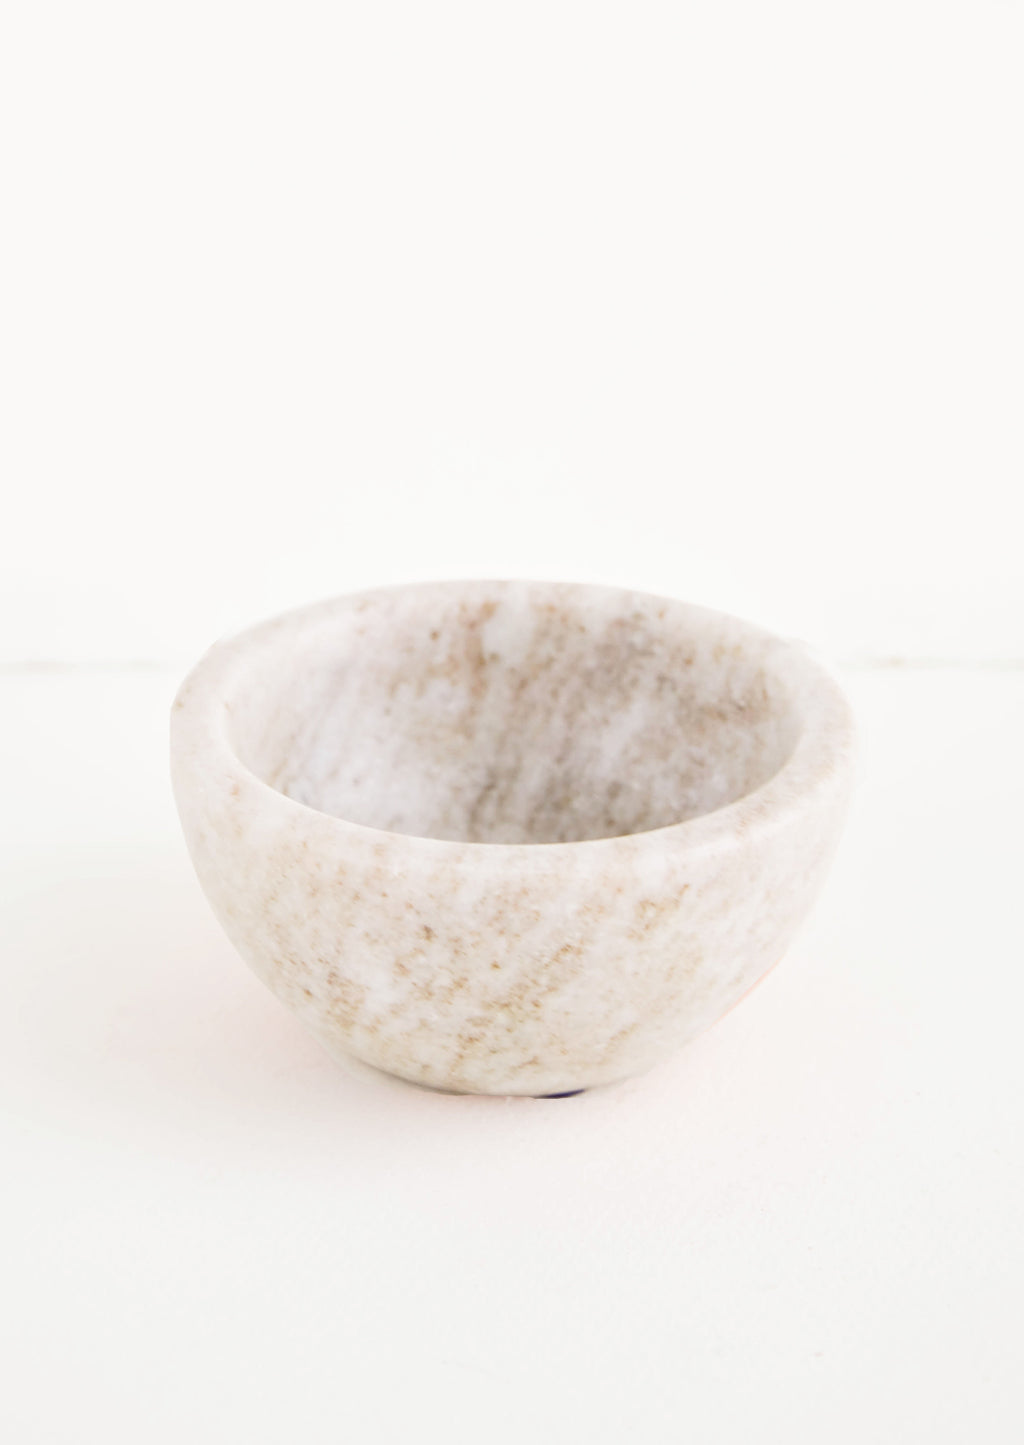 Tan: Small marble bowl made from solid grey/tan colored marble